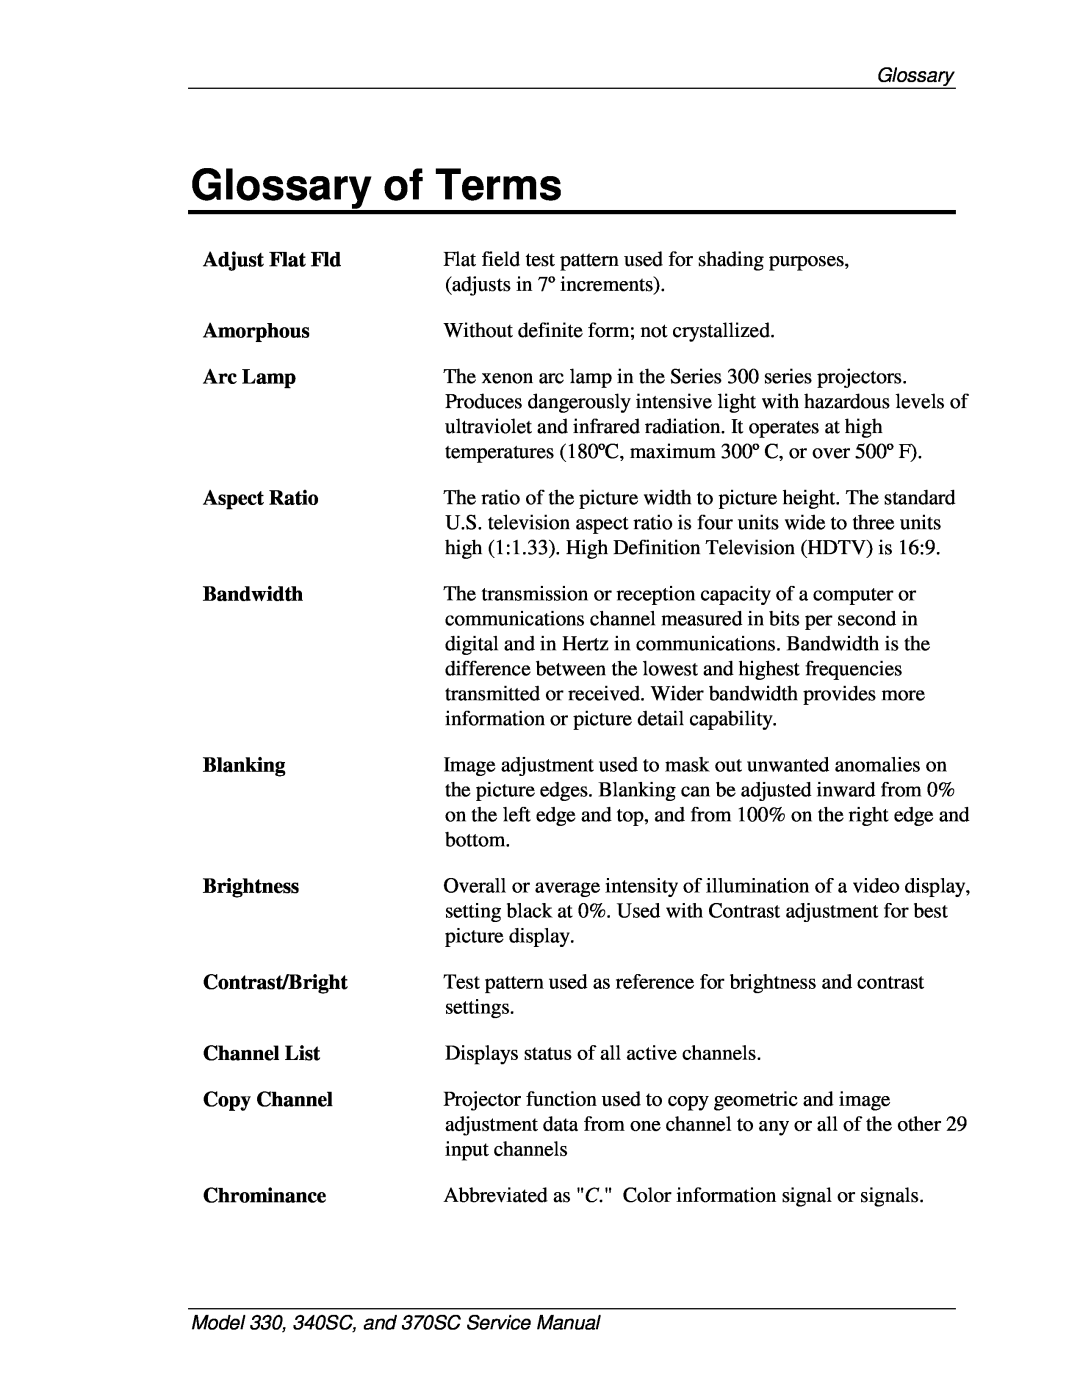 JVC 340 SC, 330, 370 SC service manual Glossary of Terms 